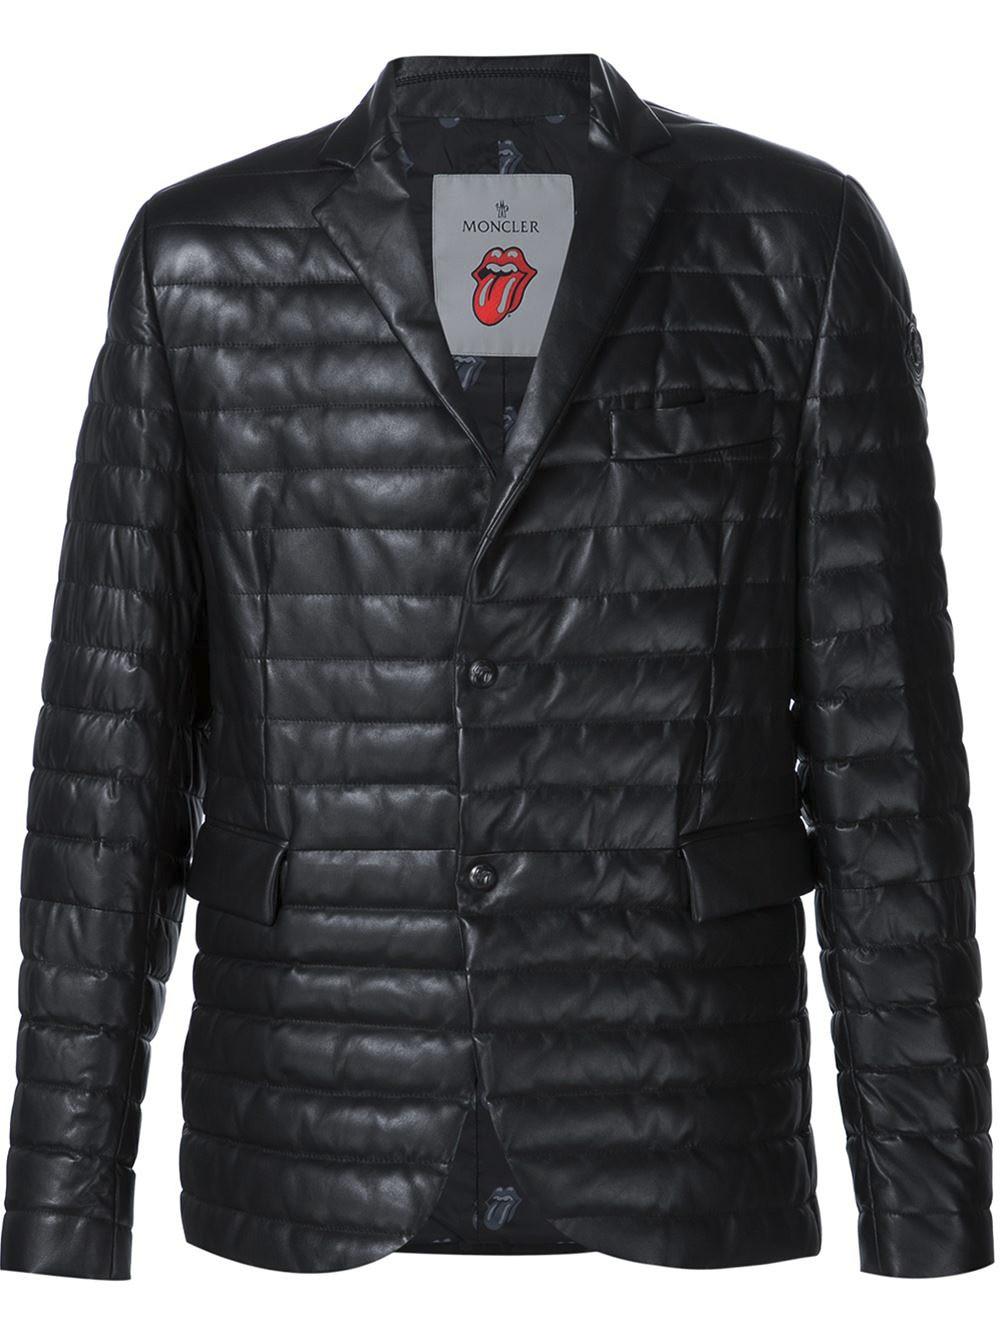 Lyst - Moncler 'riwal' Jacket By ' X Rolling Stones' in Black for Men